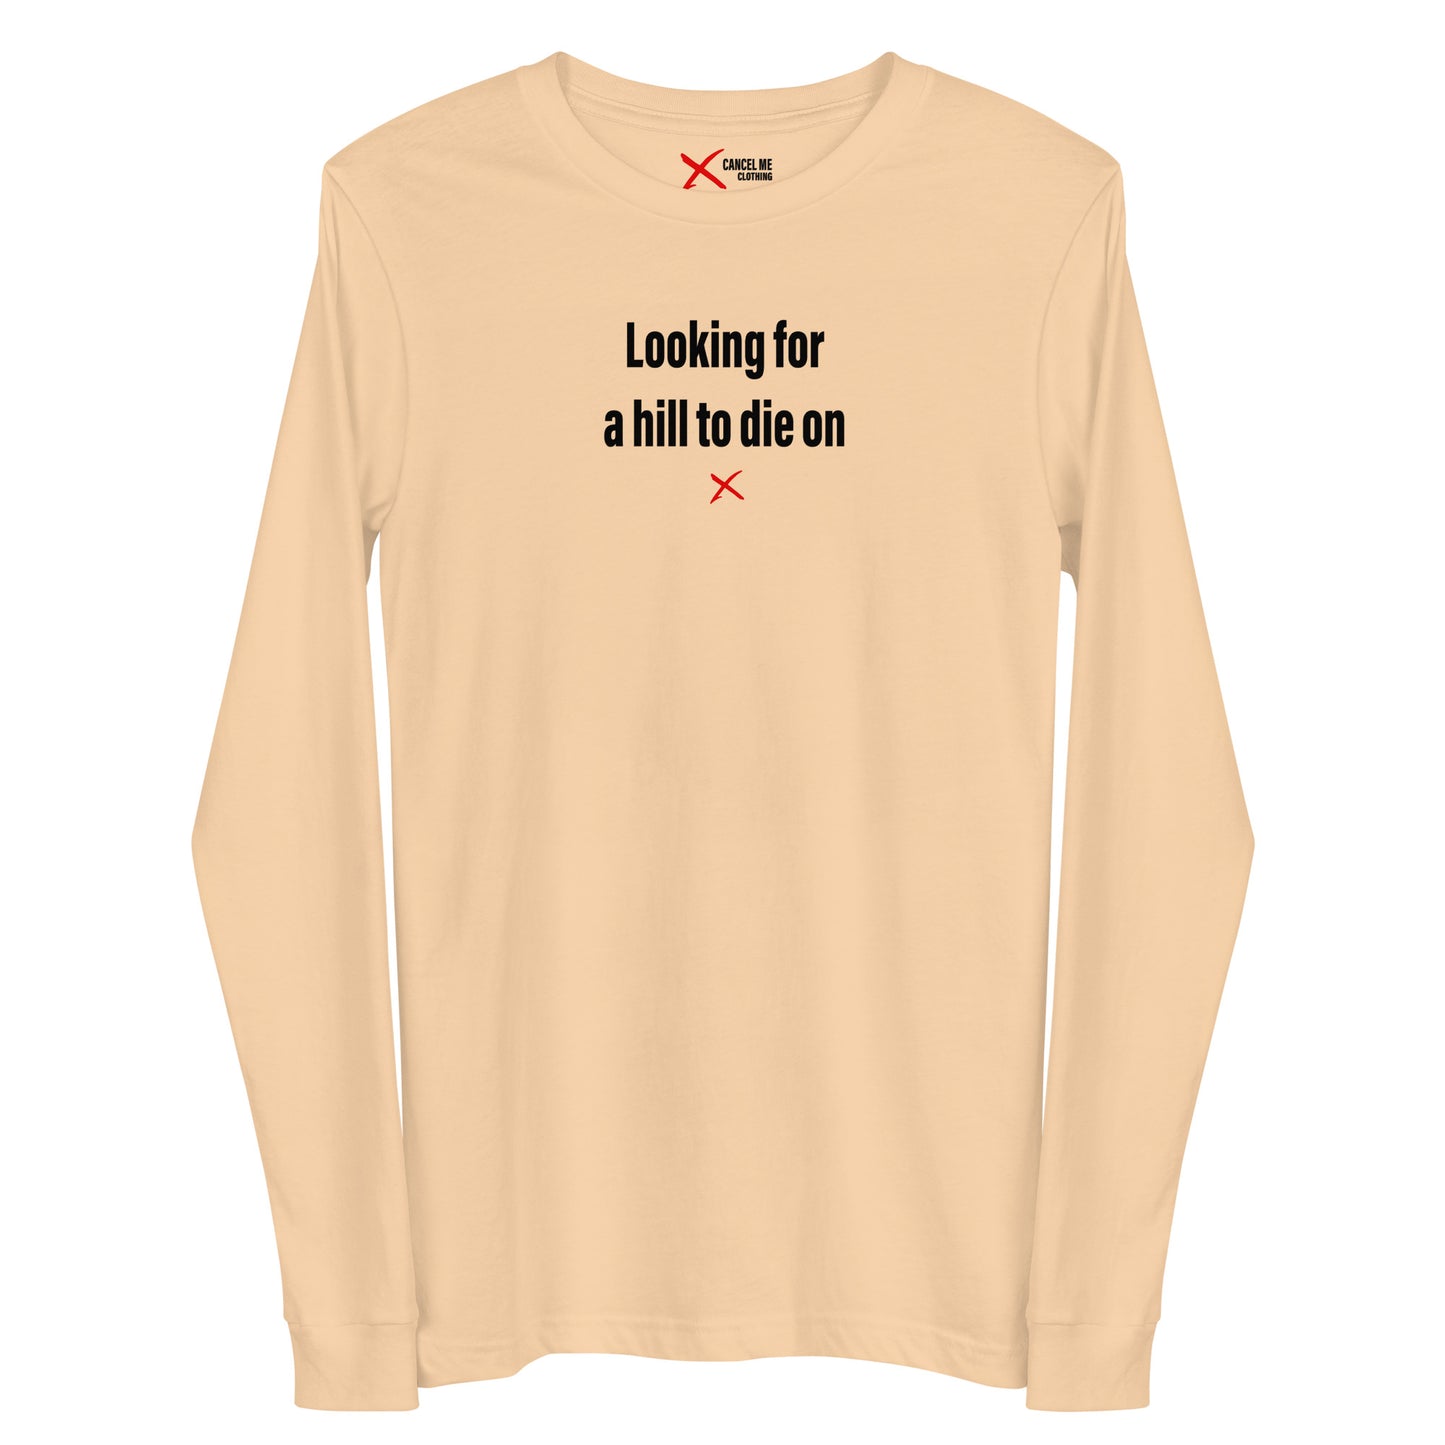 Looking for a hill to die on - Longsleeve